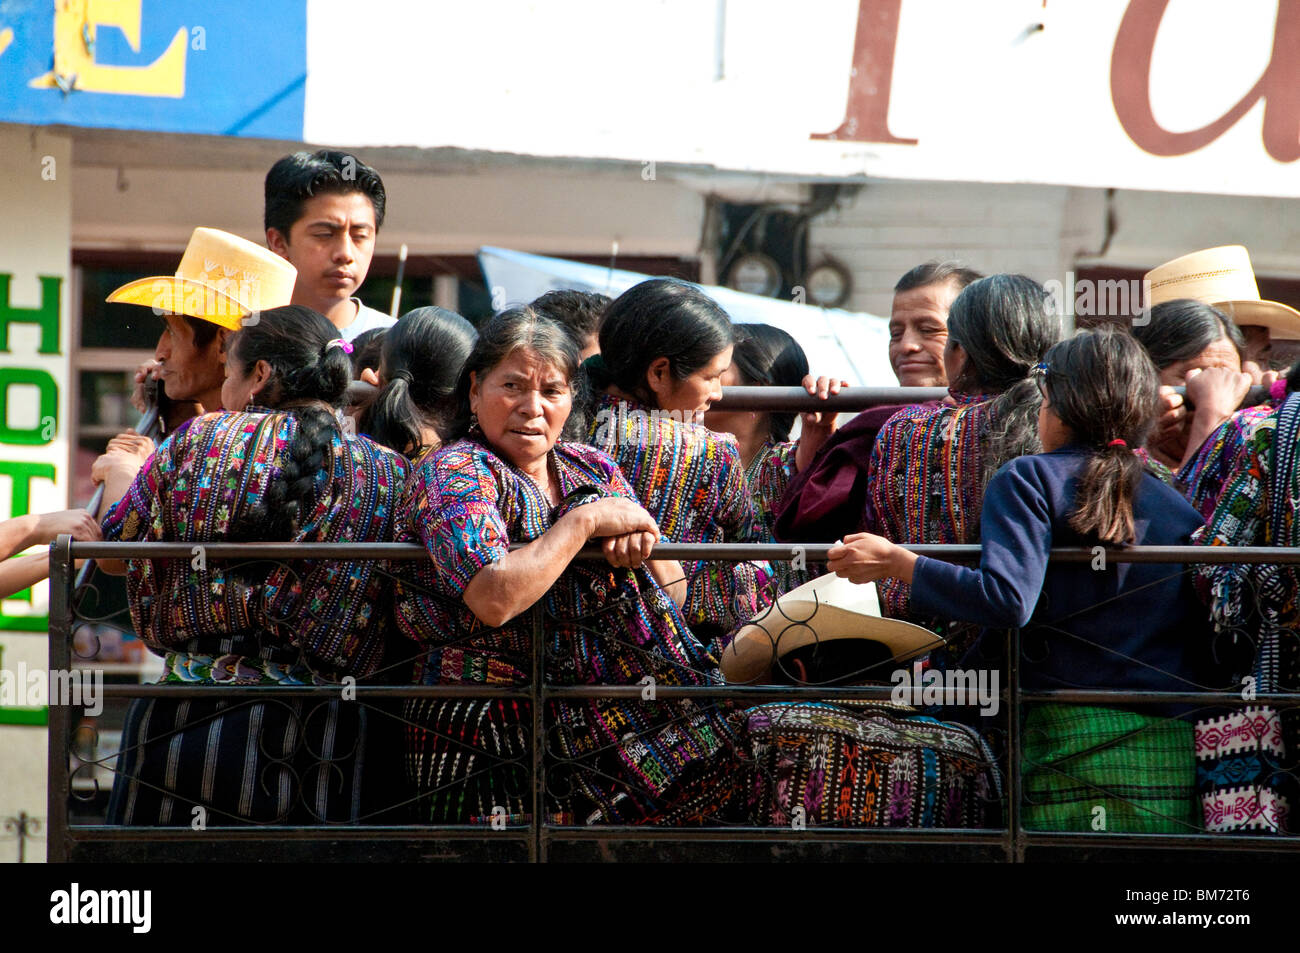 Native Indigenous Mayan People in a truck used for transporting people from a town to another town Panajachel Guatemala Stock Photo